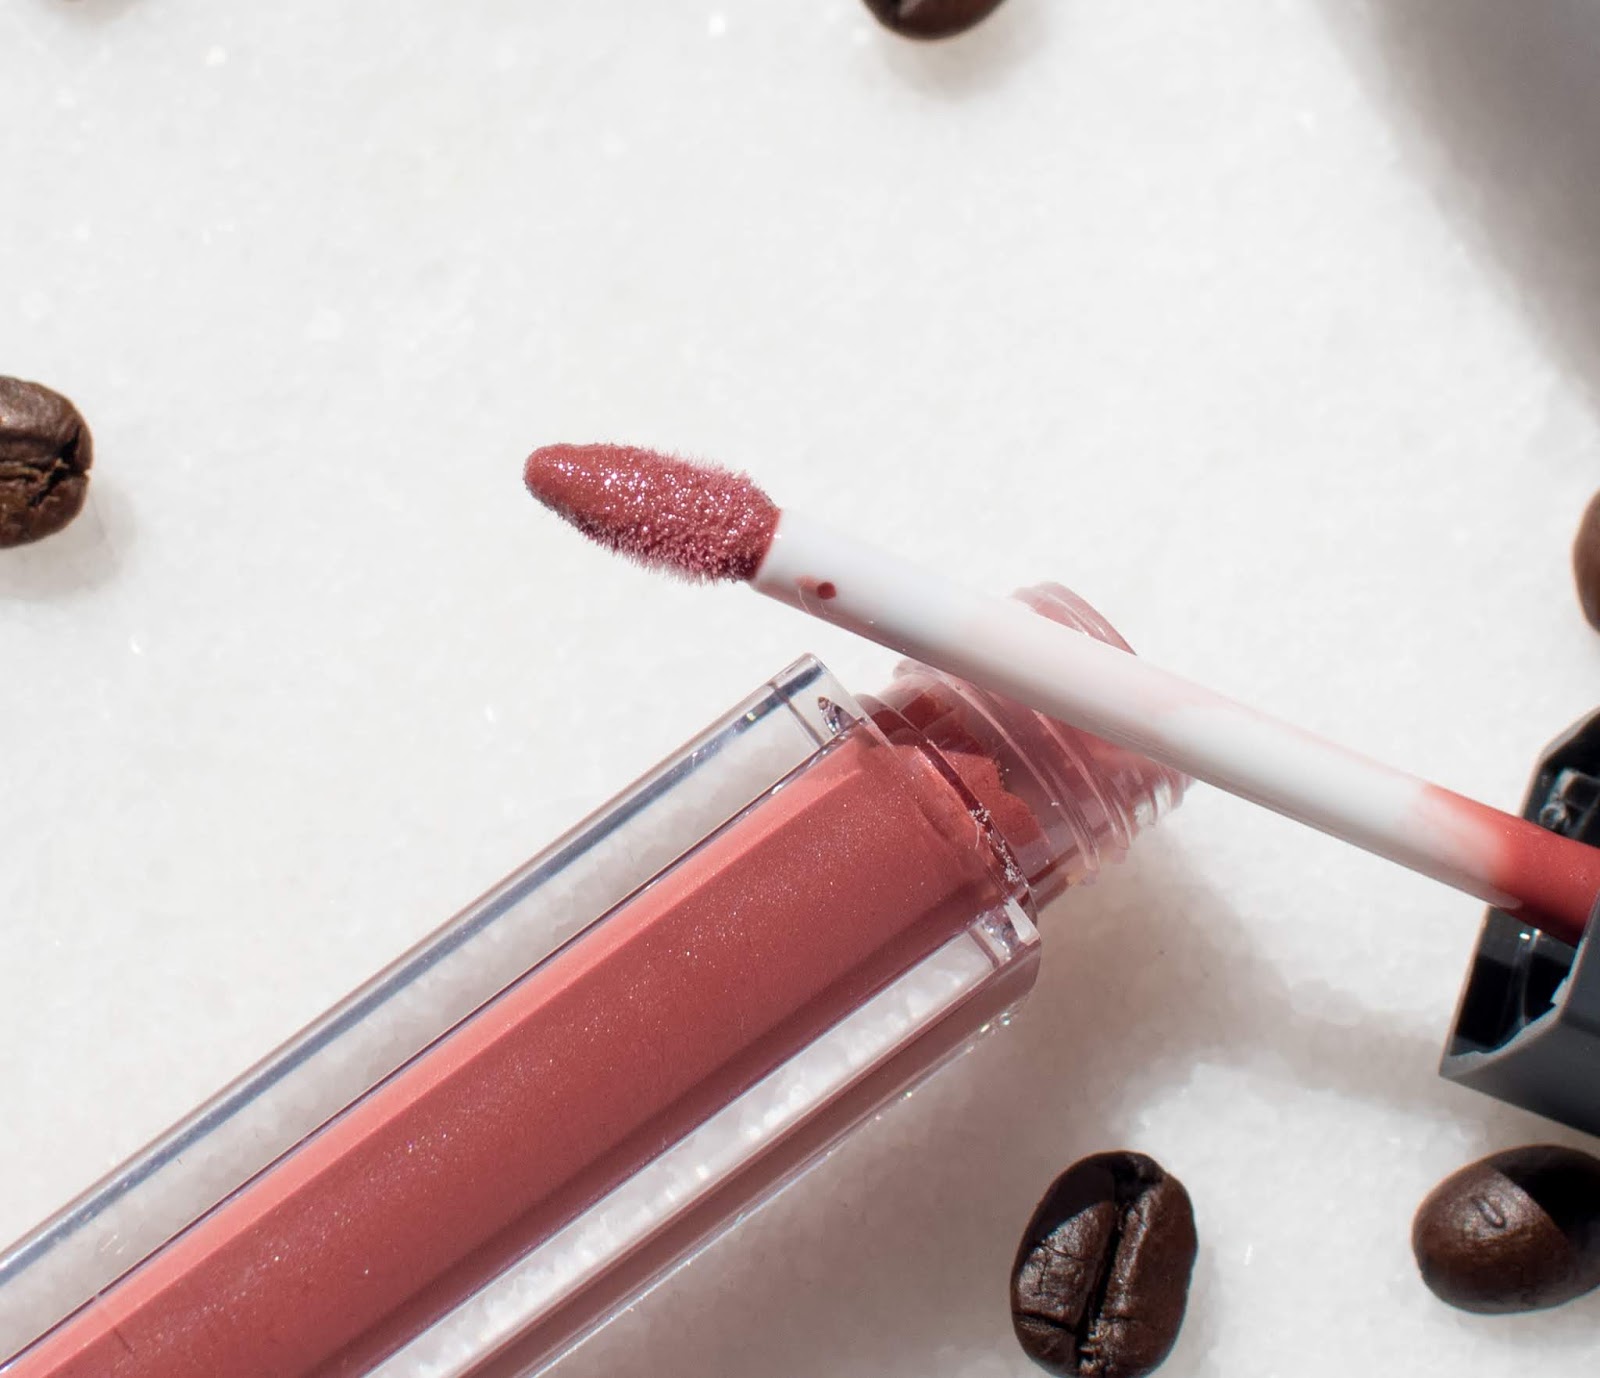 Bite Beauty French Press Lip Gloss in Dirty Chai - Swatch, Review, and Photos